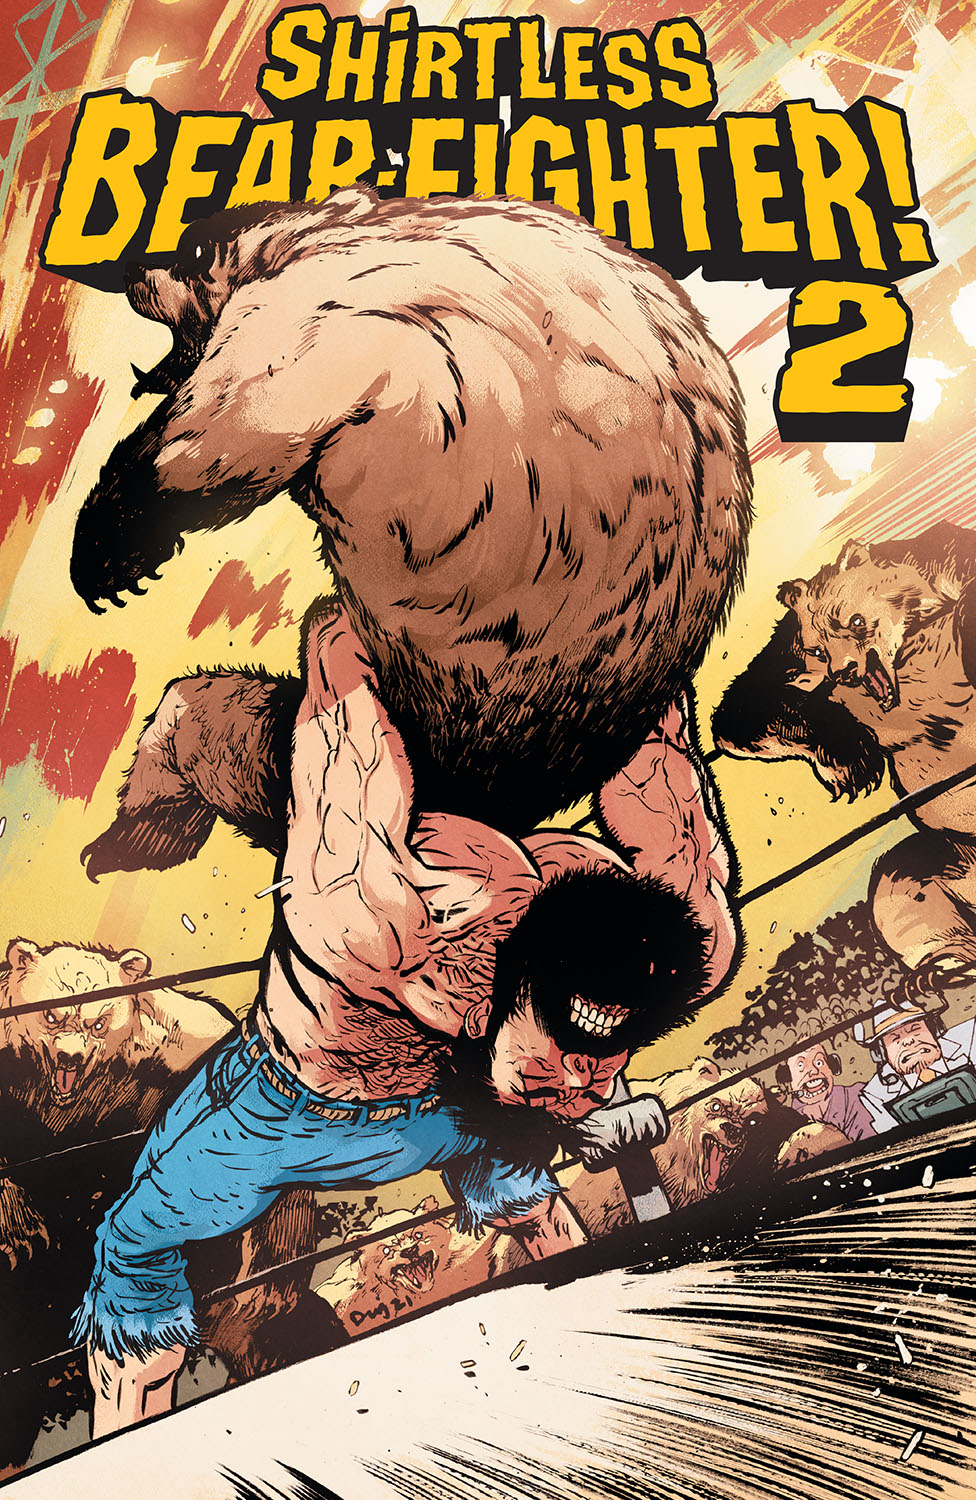 Shirtless Bear-Fighter 2 #1 Cover E 1 for 25 Incentive Johnson (Of 7)